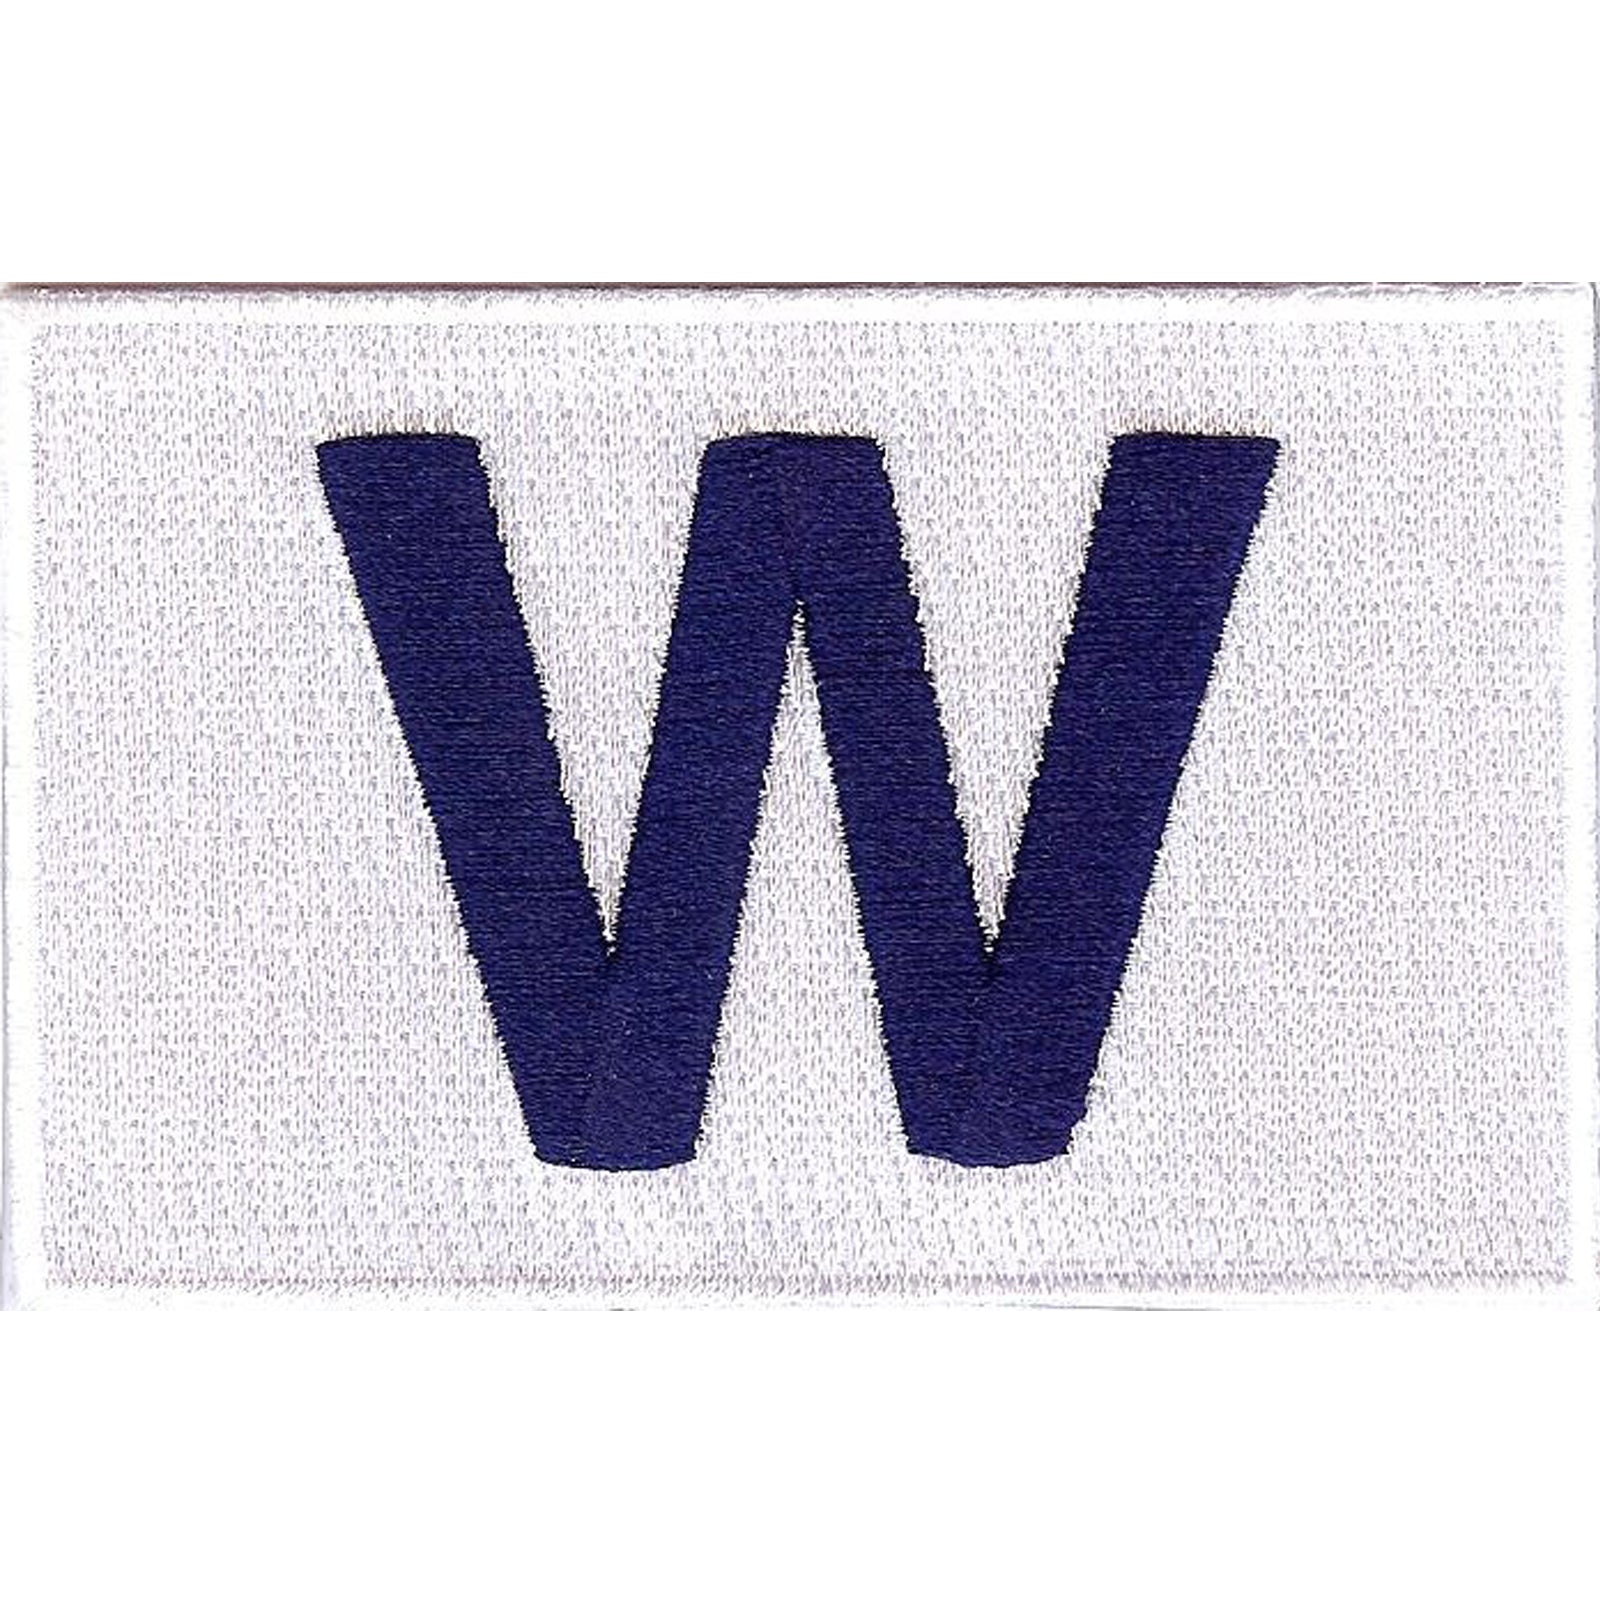 Chicago Cubs Winning Flag 'W' Patch 